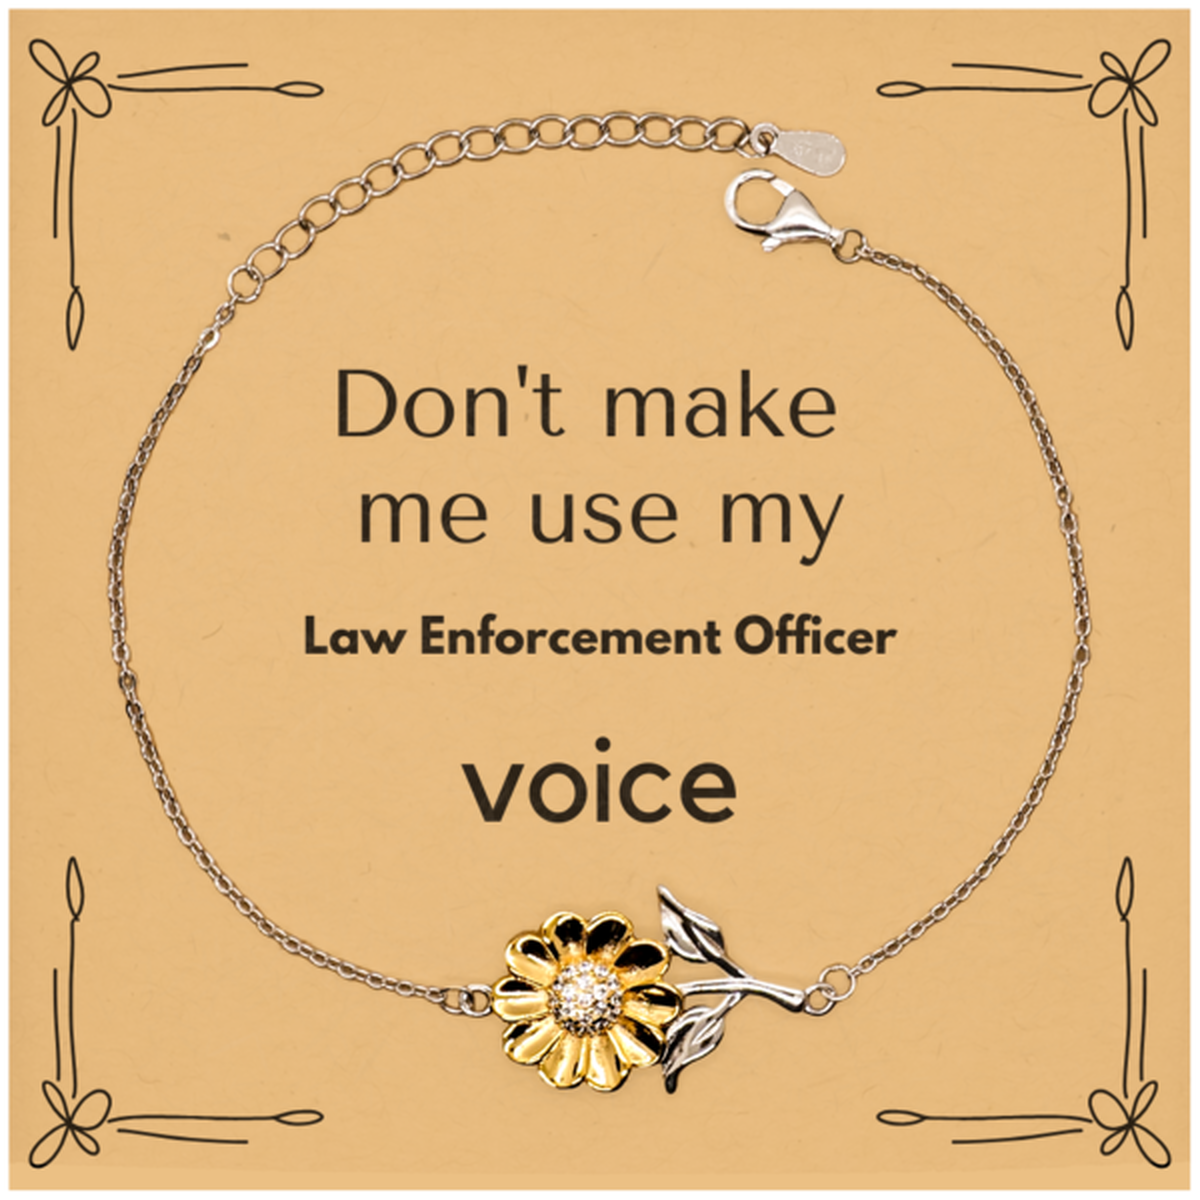 Don't make me use my Law Enforcement Officer voice, Sarcasm Law Enforcement Officer Card Gifts, Christmas Law Enforcement Officer Sunflower Bracelet Birthday Unique Gifts For Law Enforcement Officer Coworkers, Men, Women, Colleague, Friends